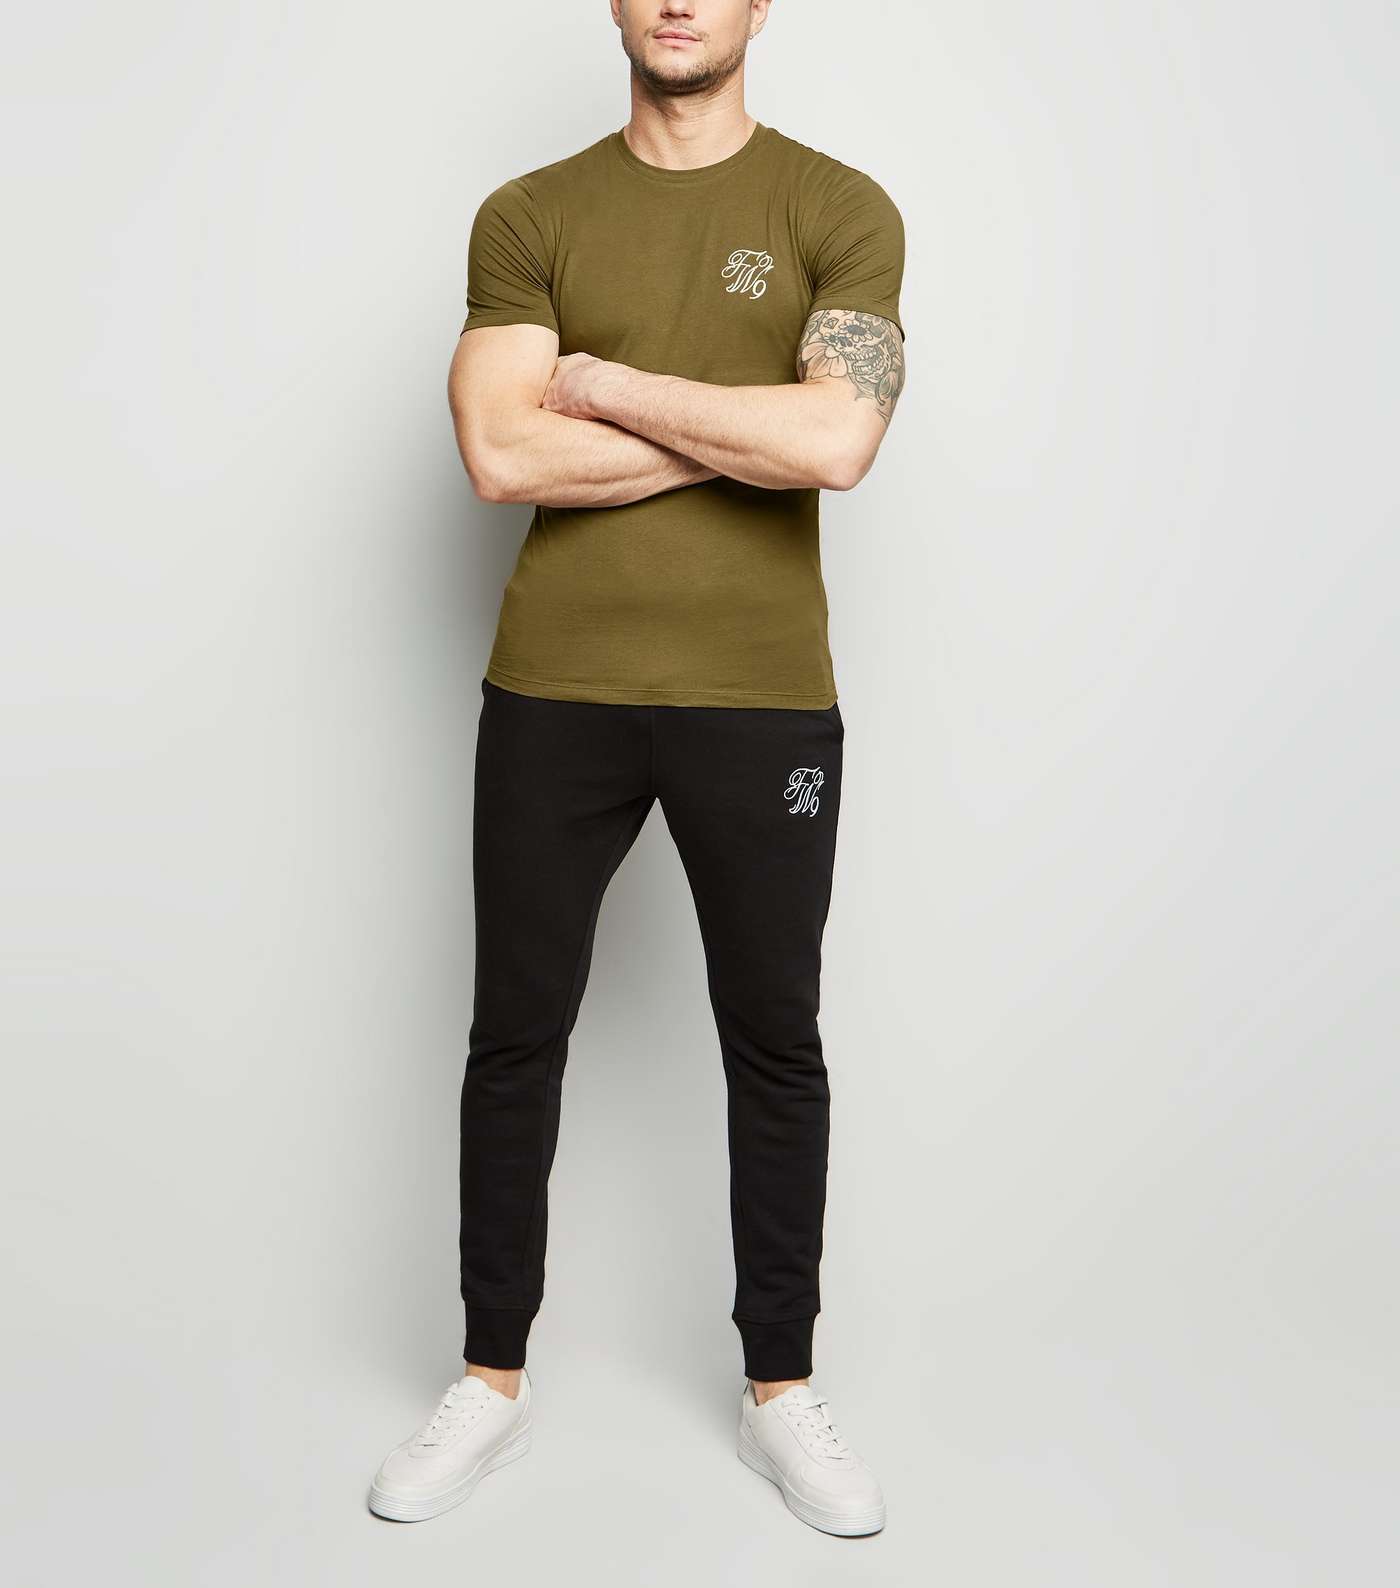 Green TW9 Embroidered Muscle Fit T-Shirt Image 2